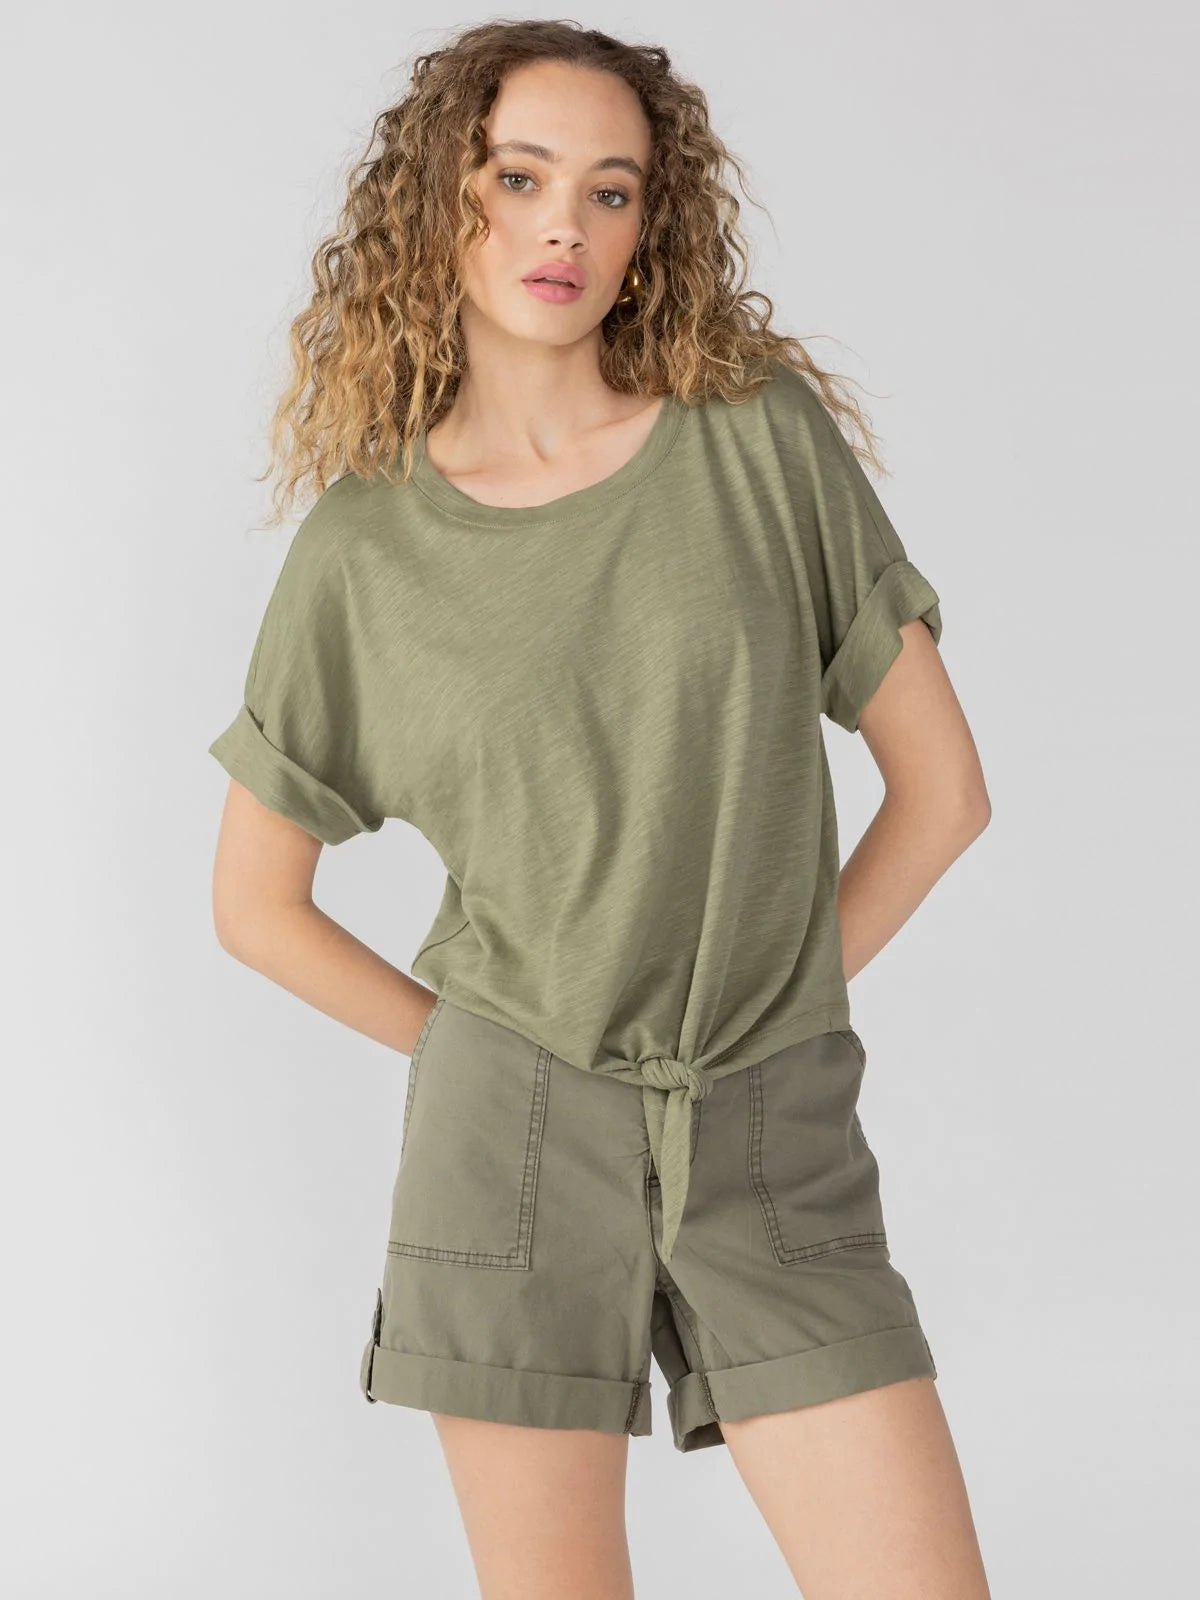 Sanctuary All Day Tie Tee, Trail Green